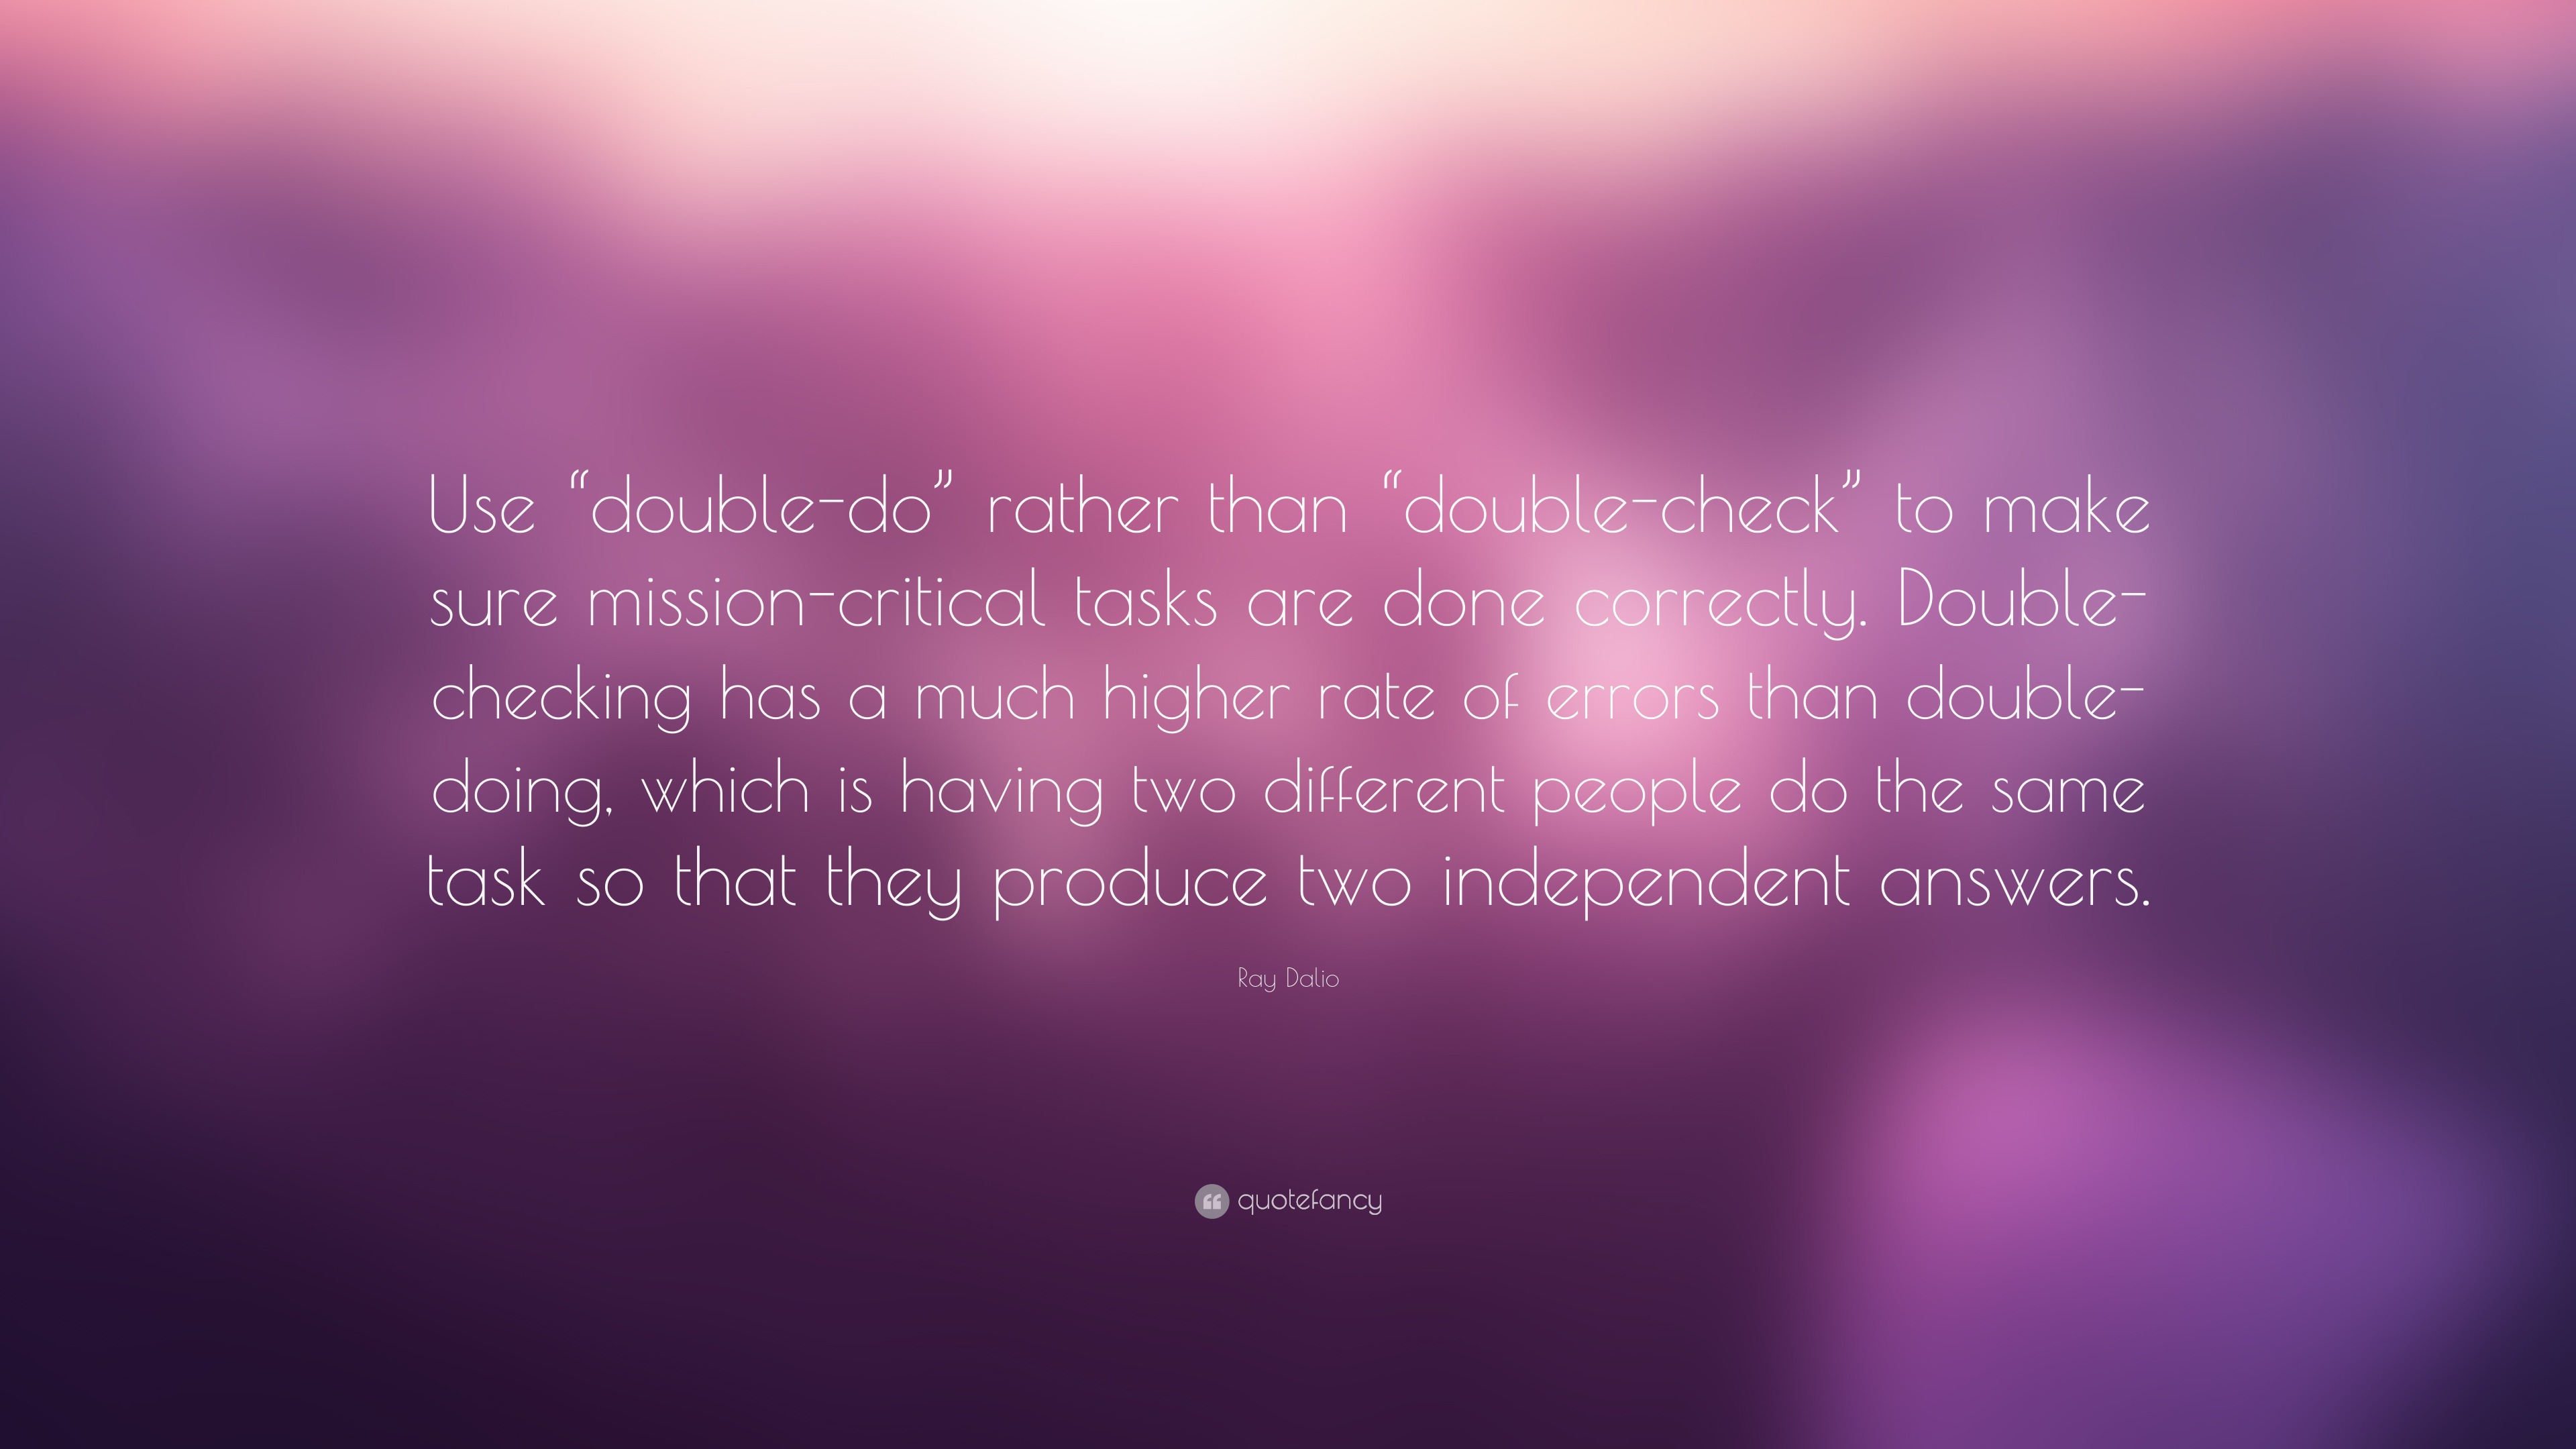 Ray Dalio Quote: “Use “double-do” rather than “double-check” to